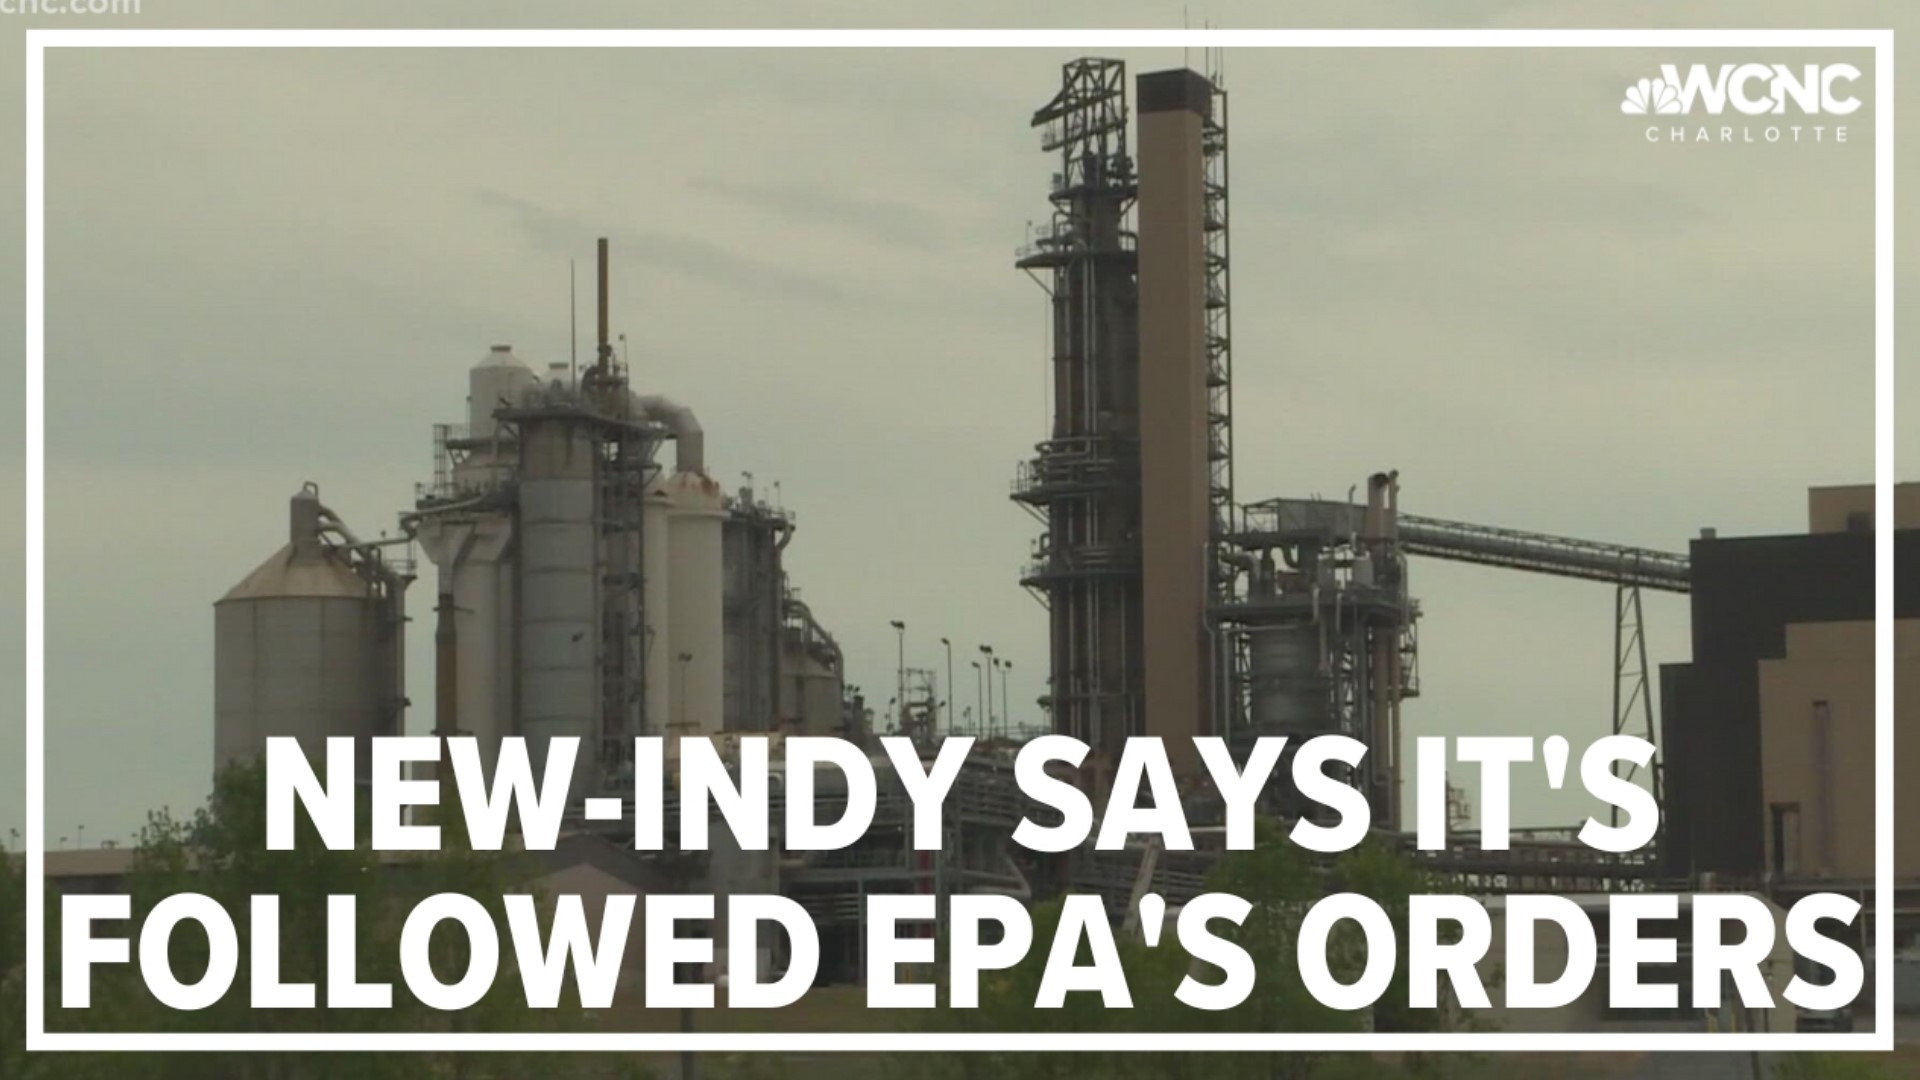 Attorneys say despite what New Indy and the EPA say, the problem is still there.